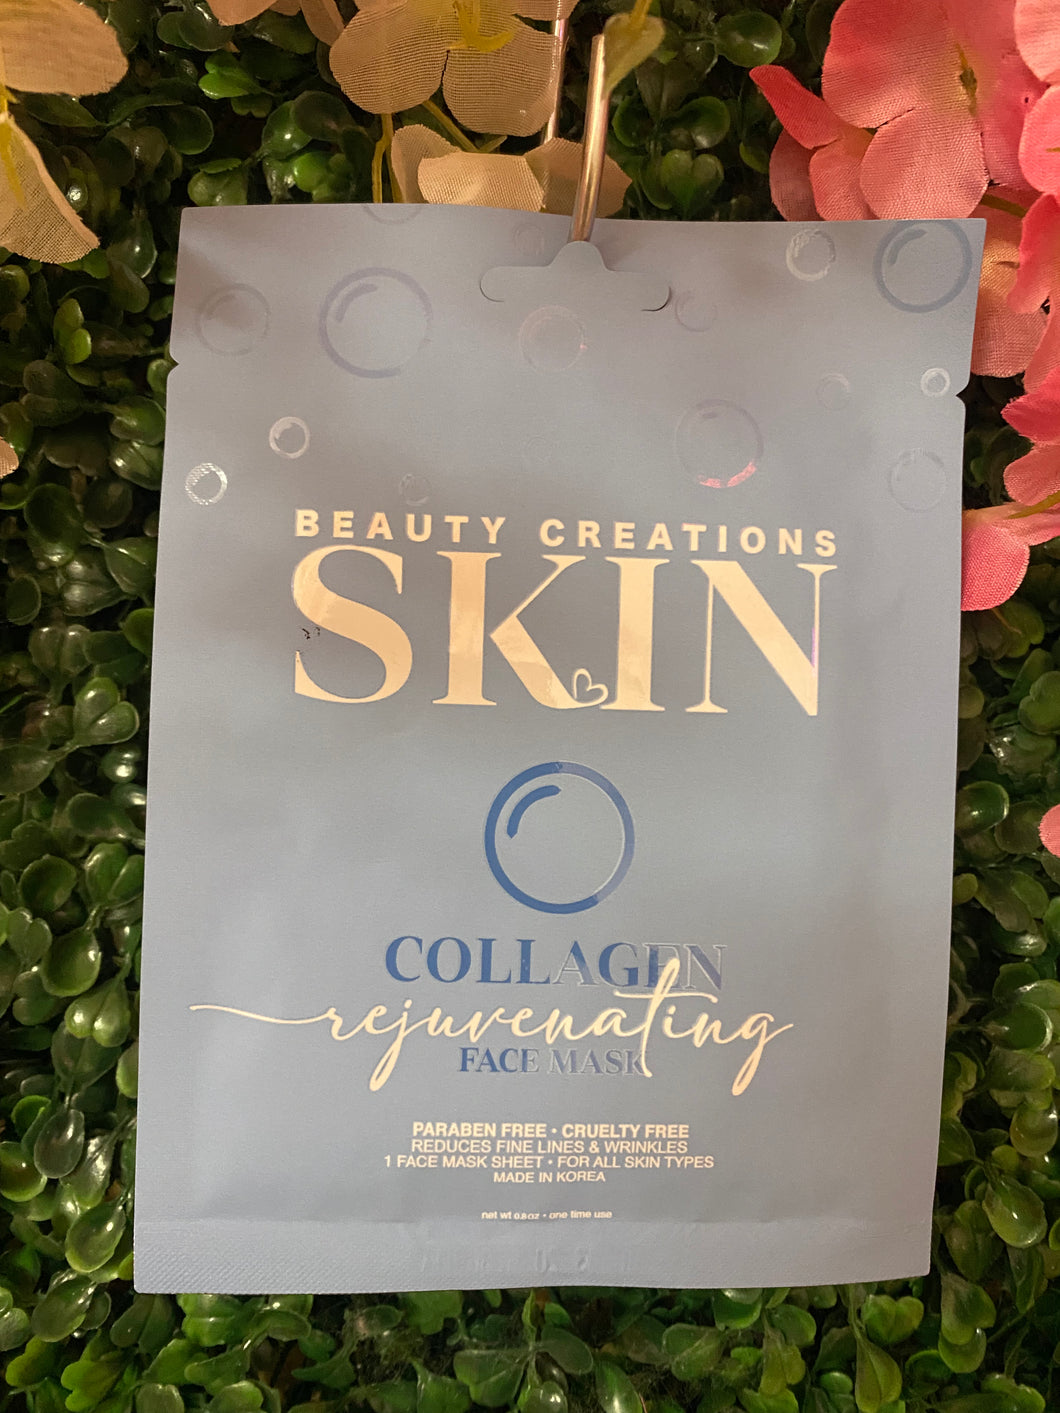 Beauty Creations Skin Facemask “Collagen”